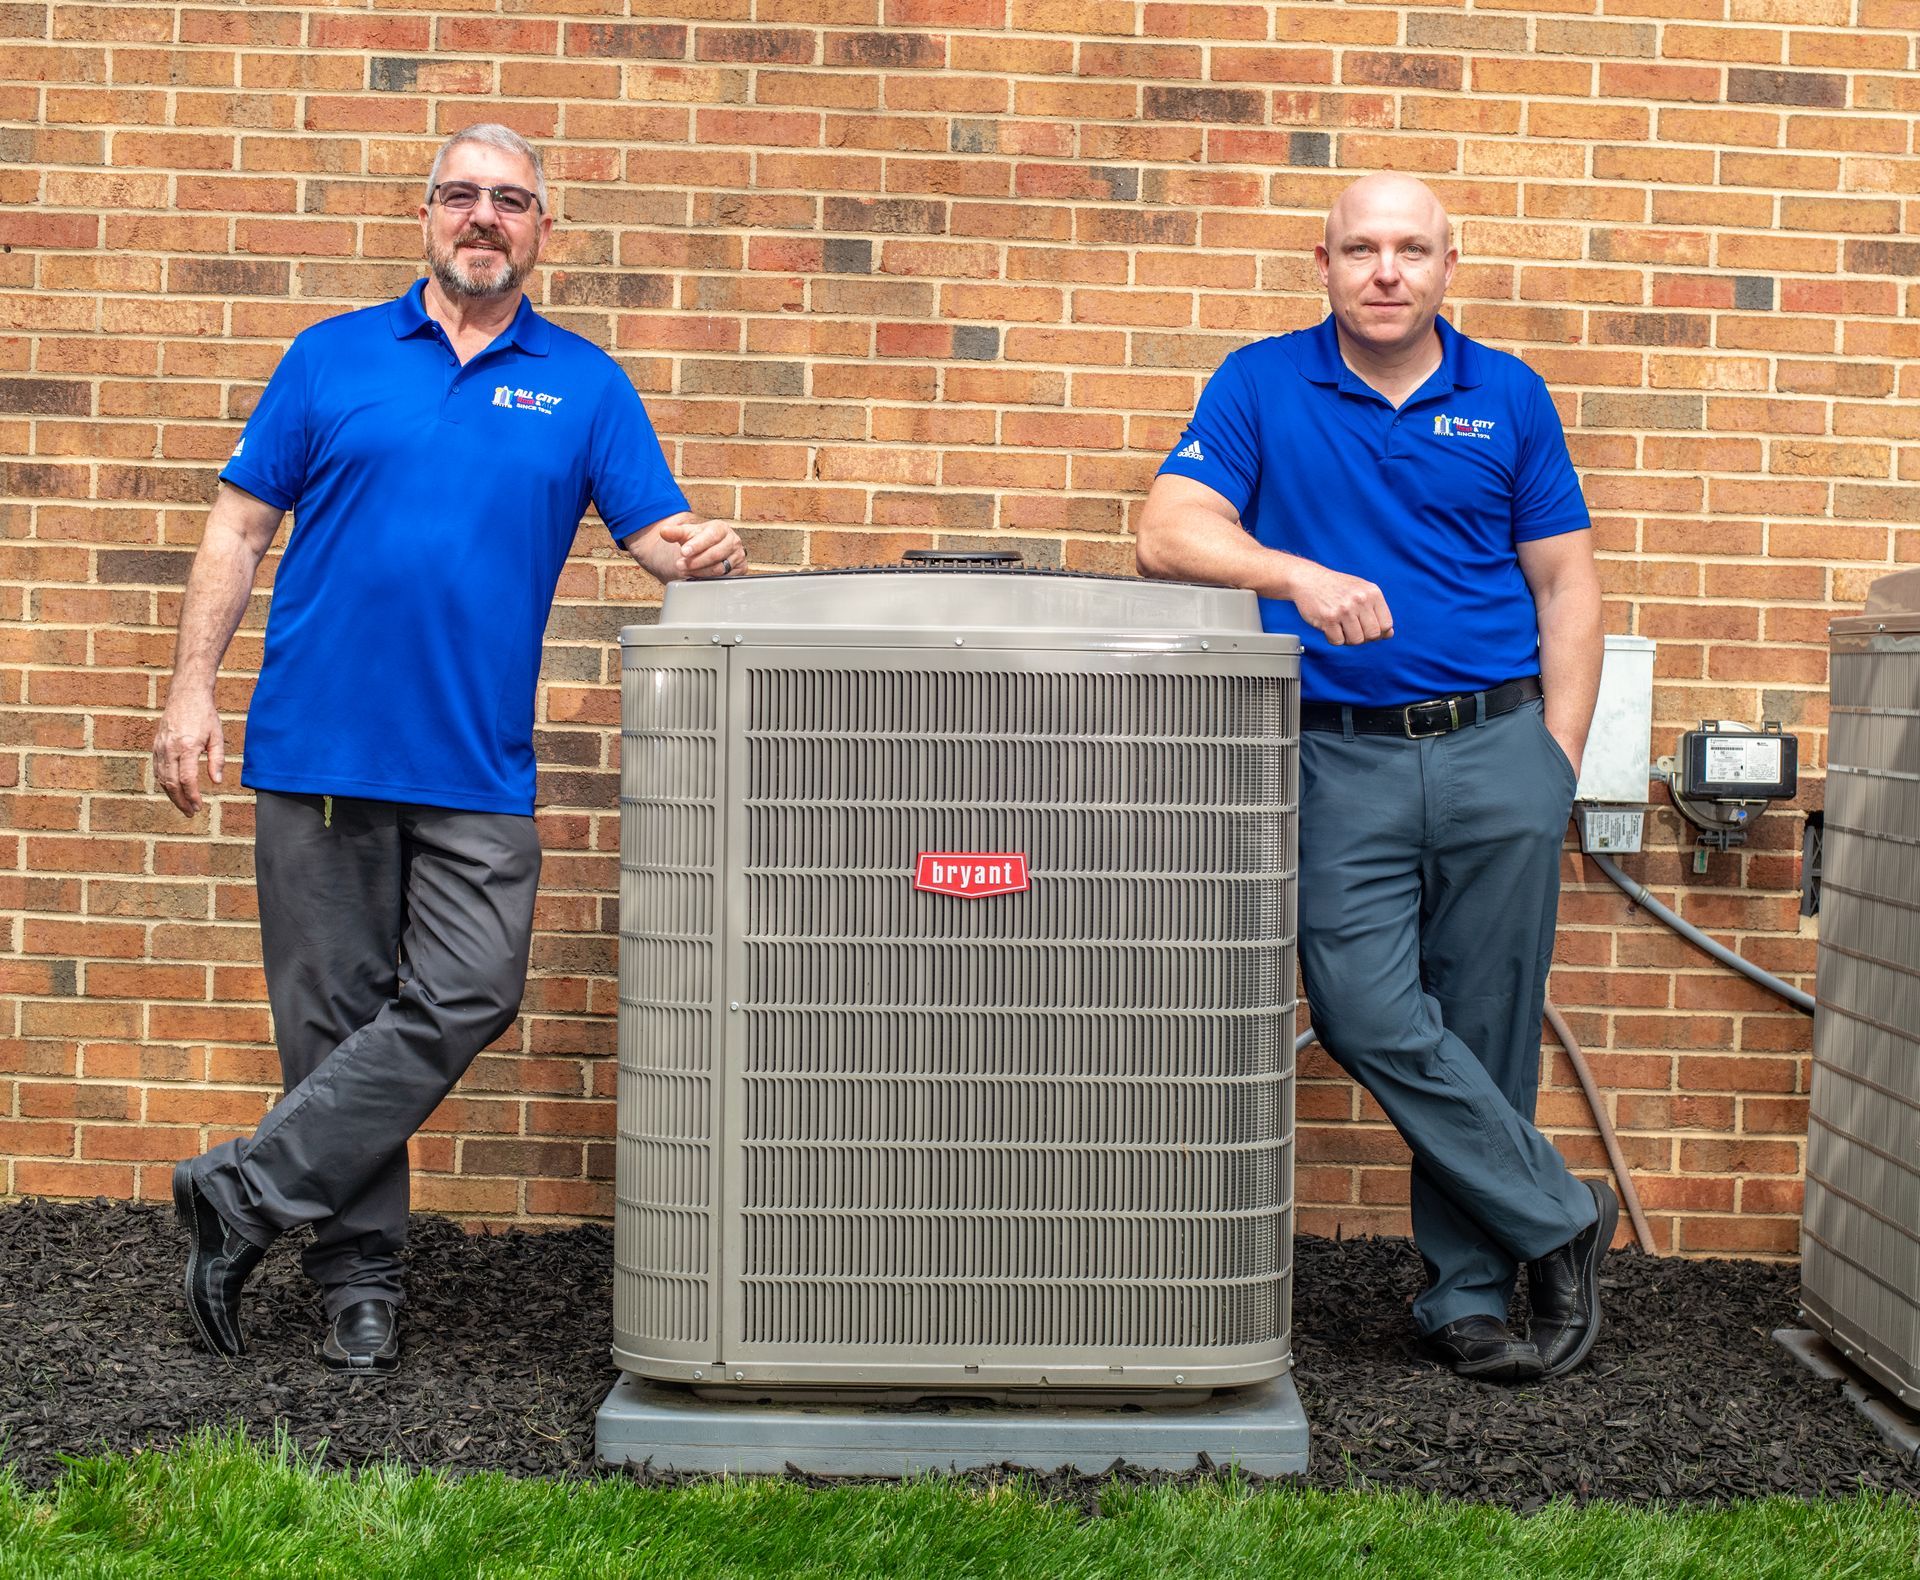 Two All City Heat and Air technicians in blue shirts are standing next to an air conditioner.